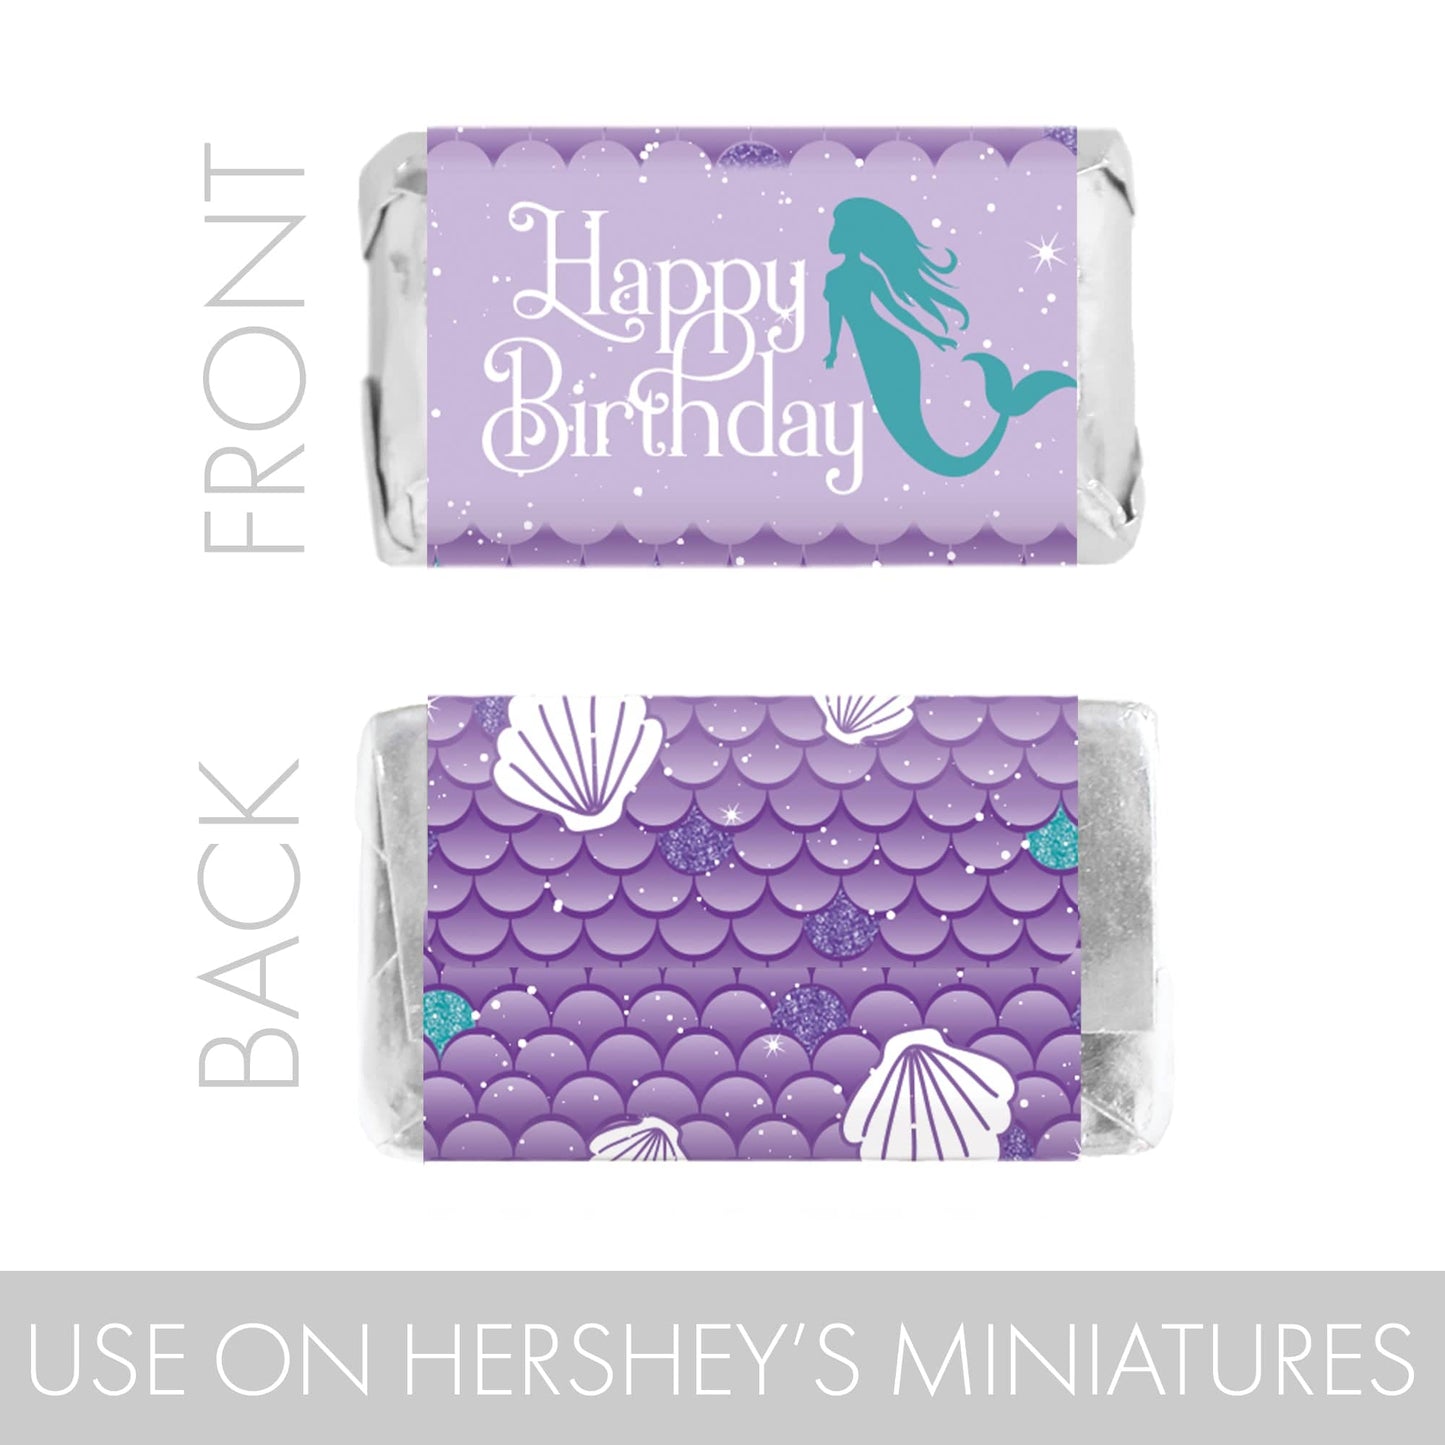 Mermaid Birthday Party Mini Candy Bar Stickers - 45 Count